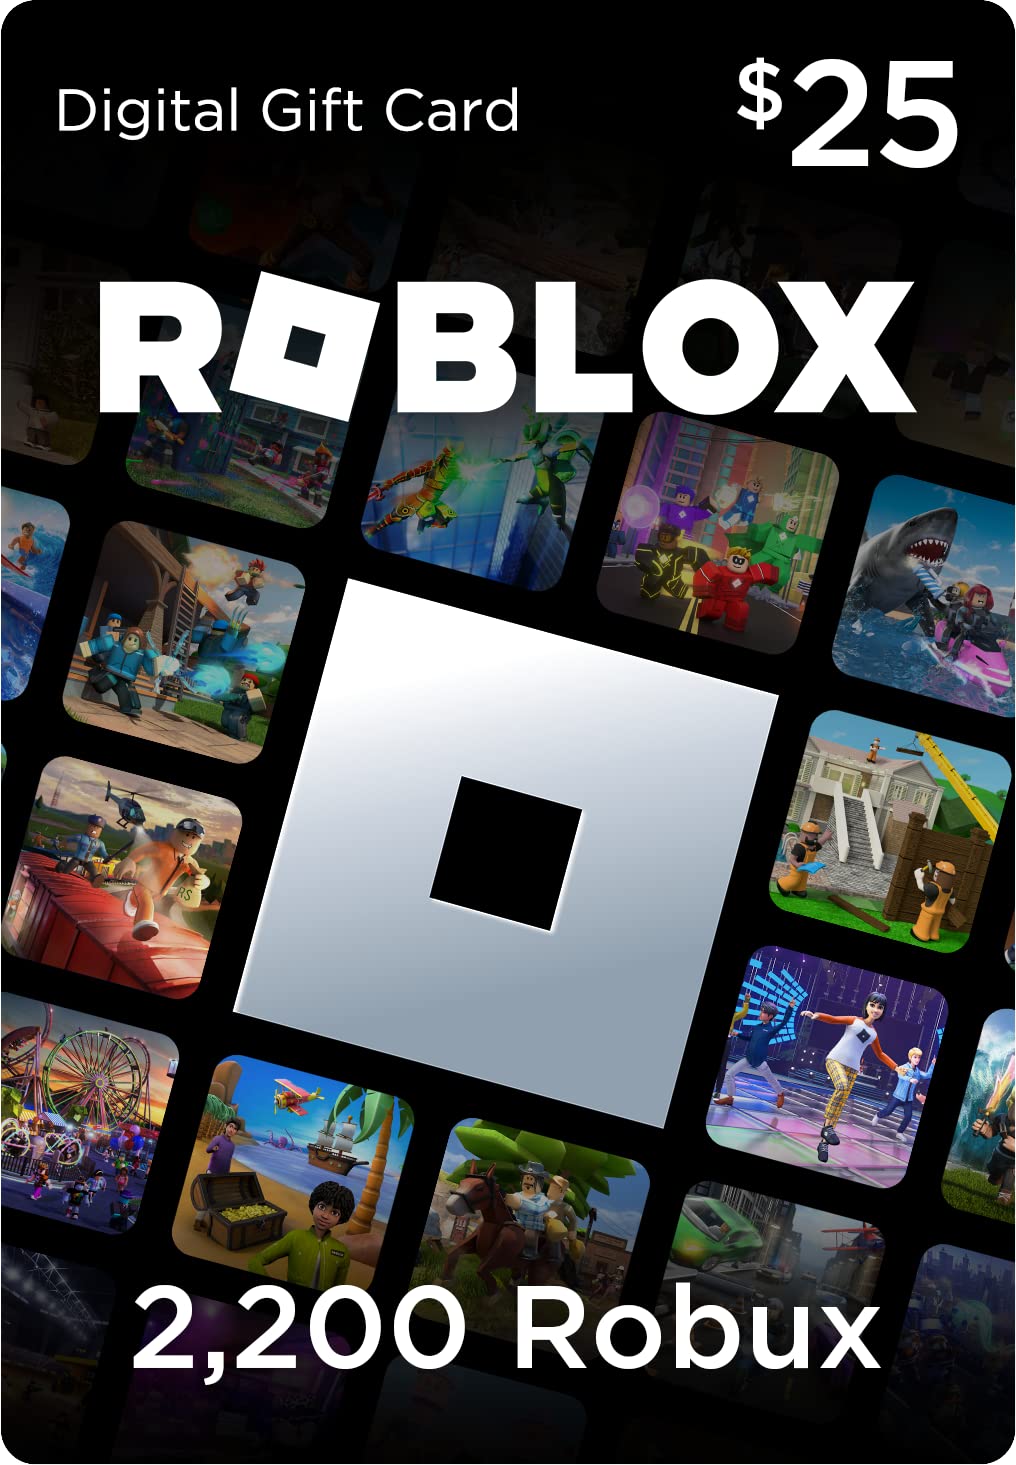 Buy Roblox Gift Card 2200 Robux (PC) - Roblox Key - UNITED STATES